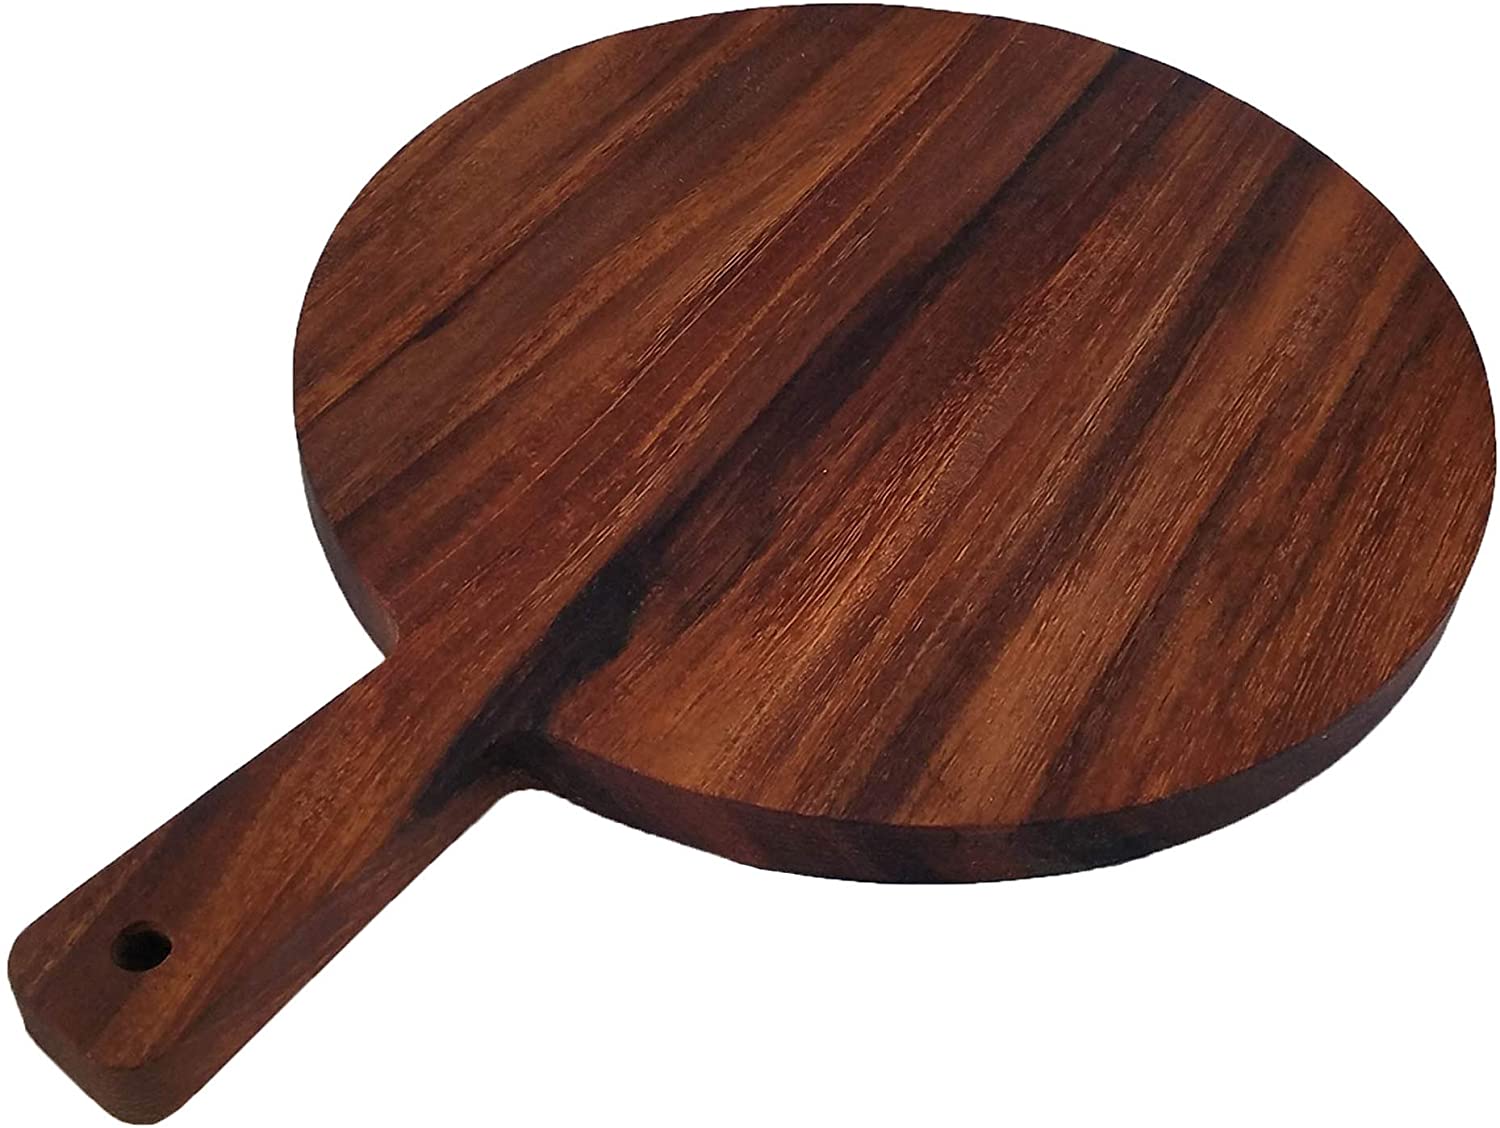 PAROTA WOOD PRODUCTS / Round Parota Wood Serving/Cutting Board with Handle / Surprise your guests with this beautiful and useful serving and cutting board made from long-lasting Parota wood.